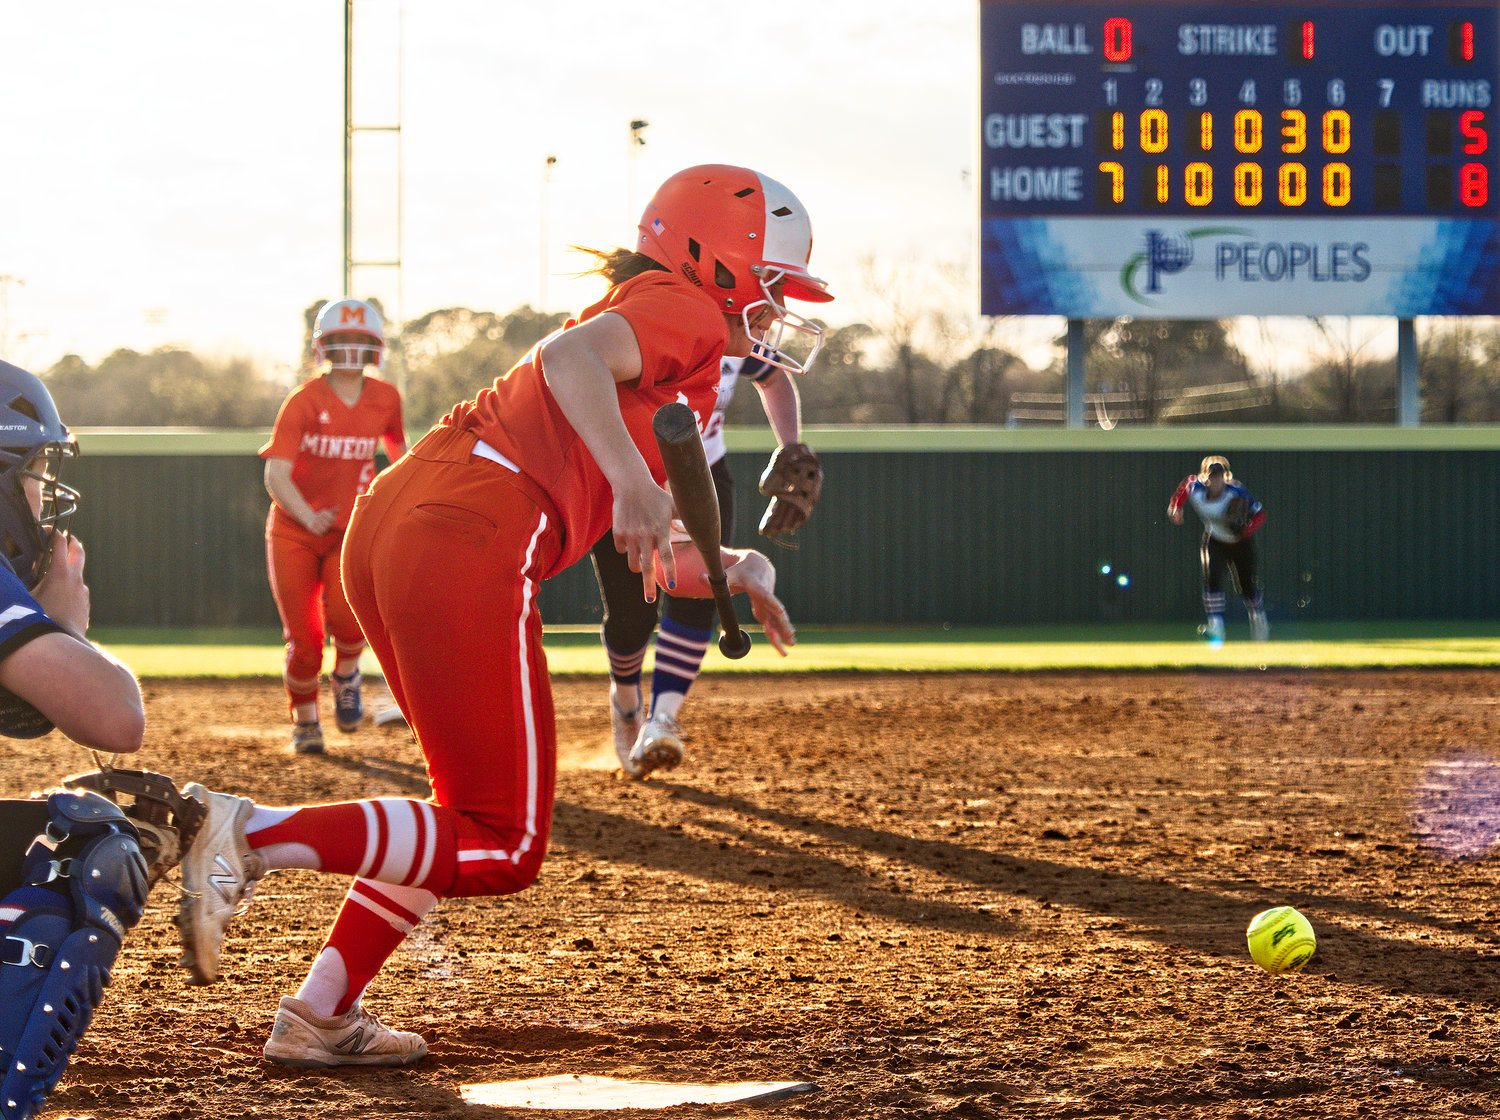 Jaycee Smith’s bunt scored Mineola’s Kenleigh Aguirre from third.